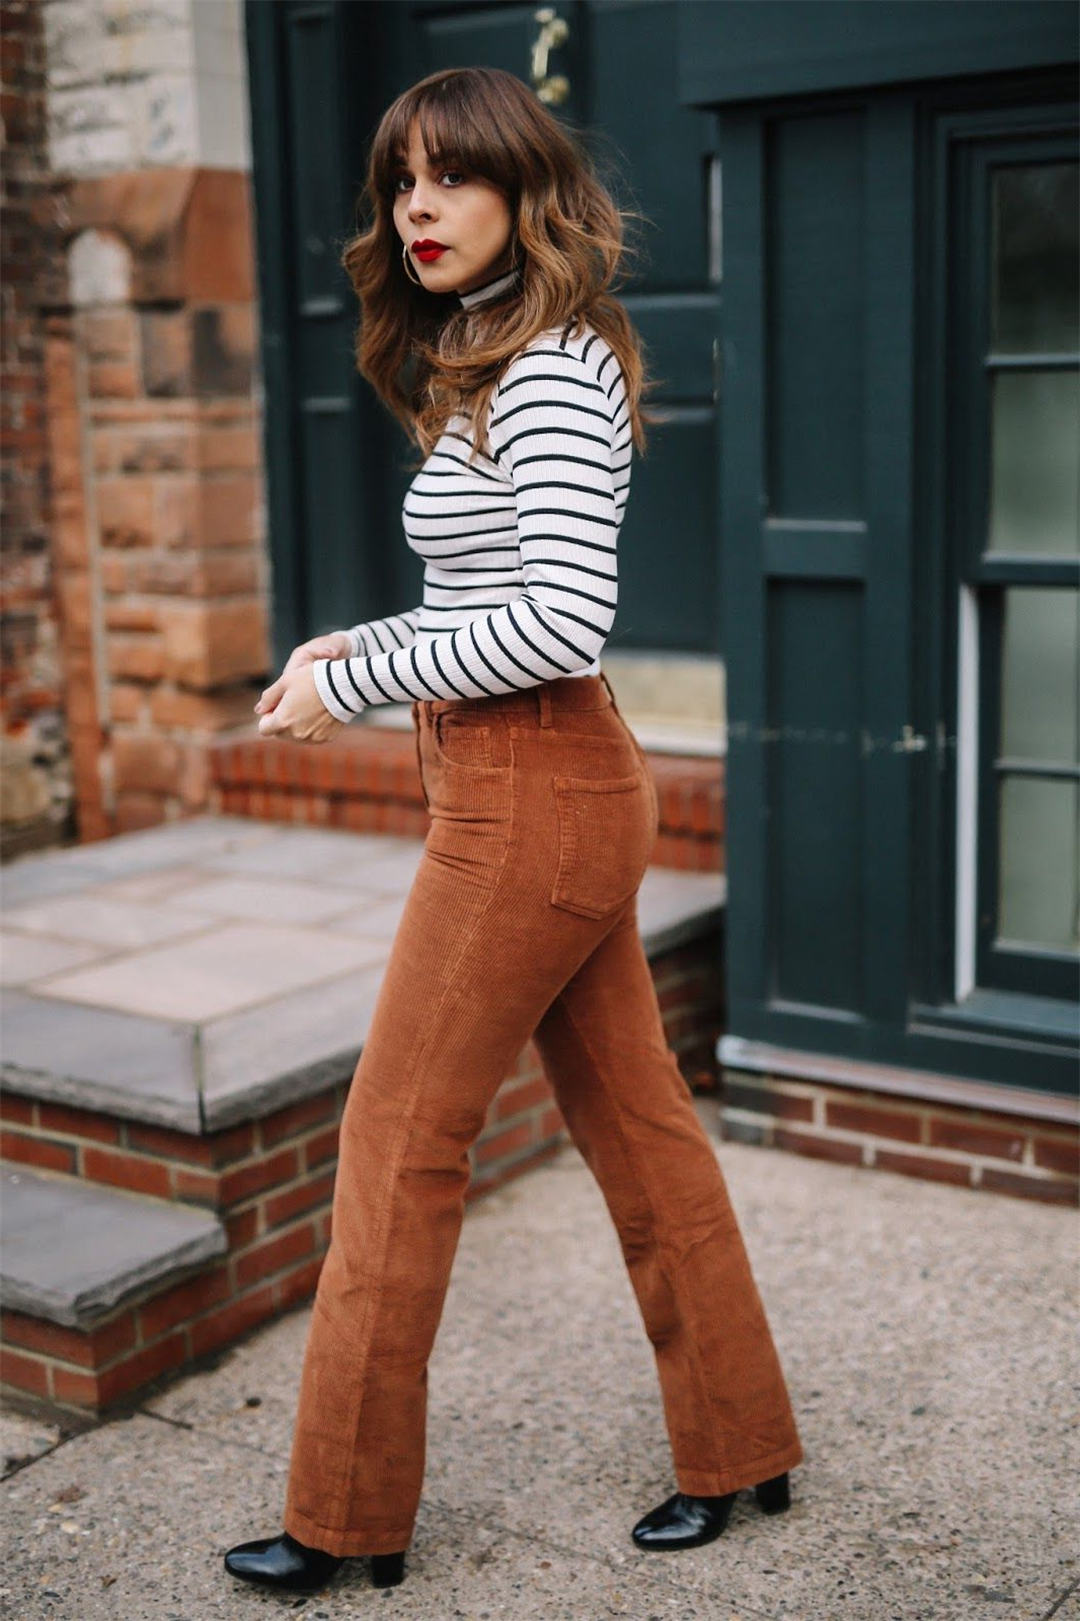 How to Style Corduroy Pants - 25 Outfit Ideas to Try